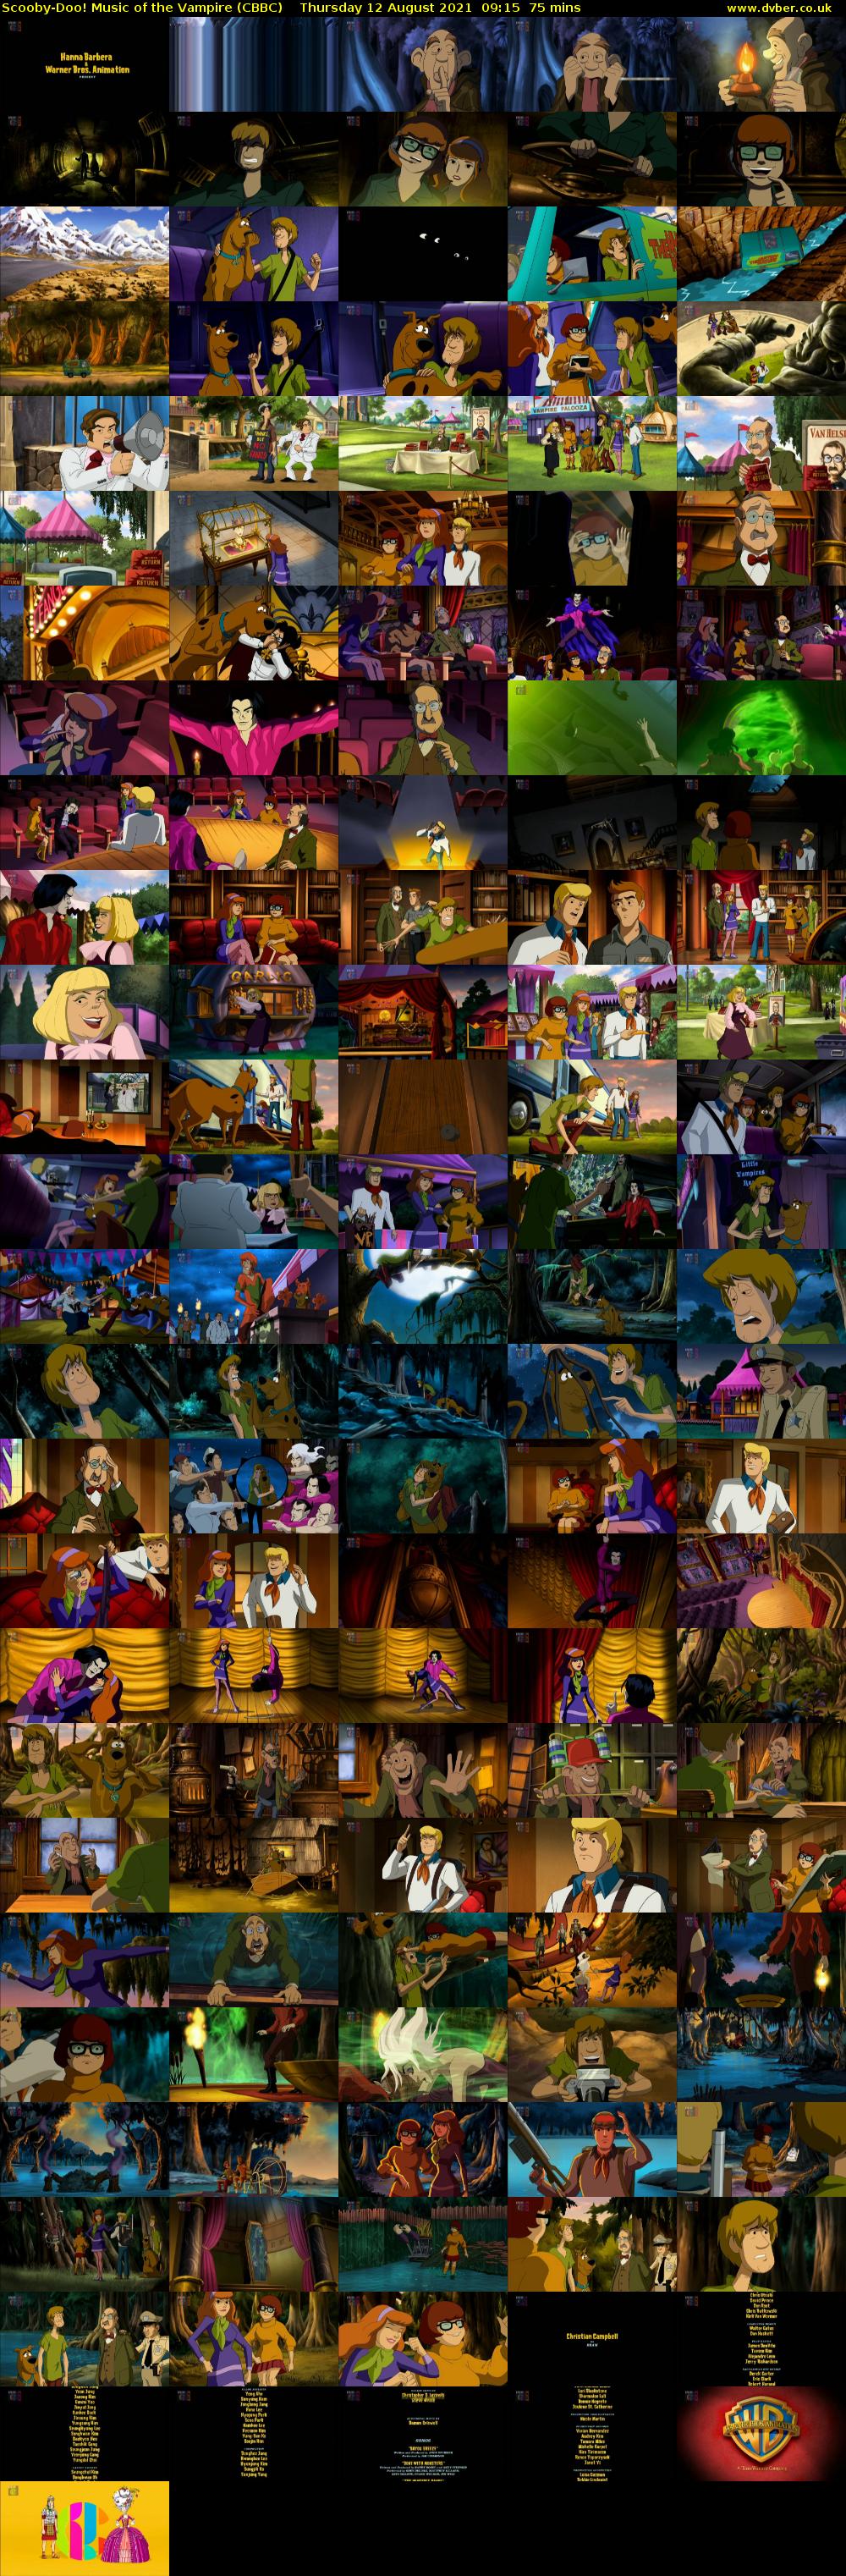 Scooby-Doo! Music of the Vampire (CBBC) Thursday 12 August 2021 09:15 - 10:30